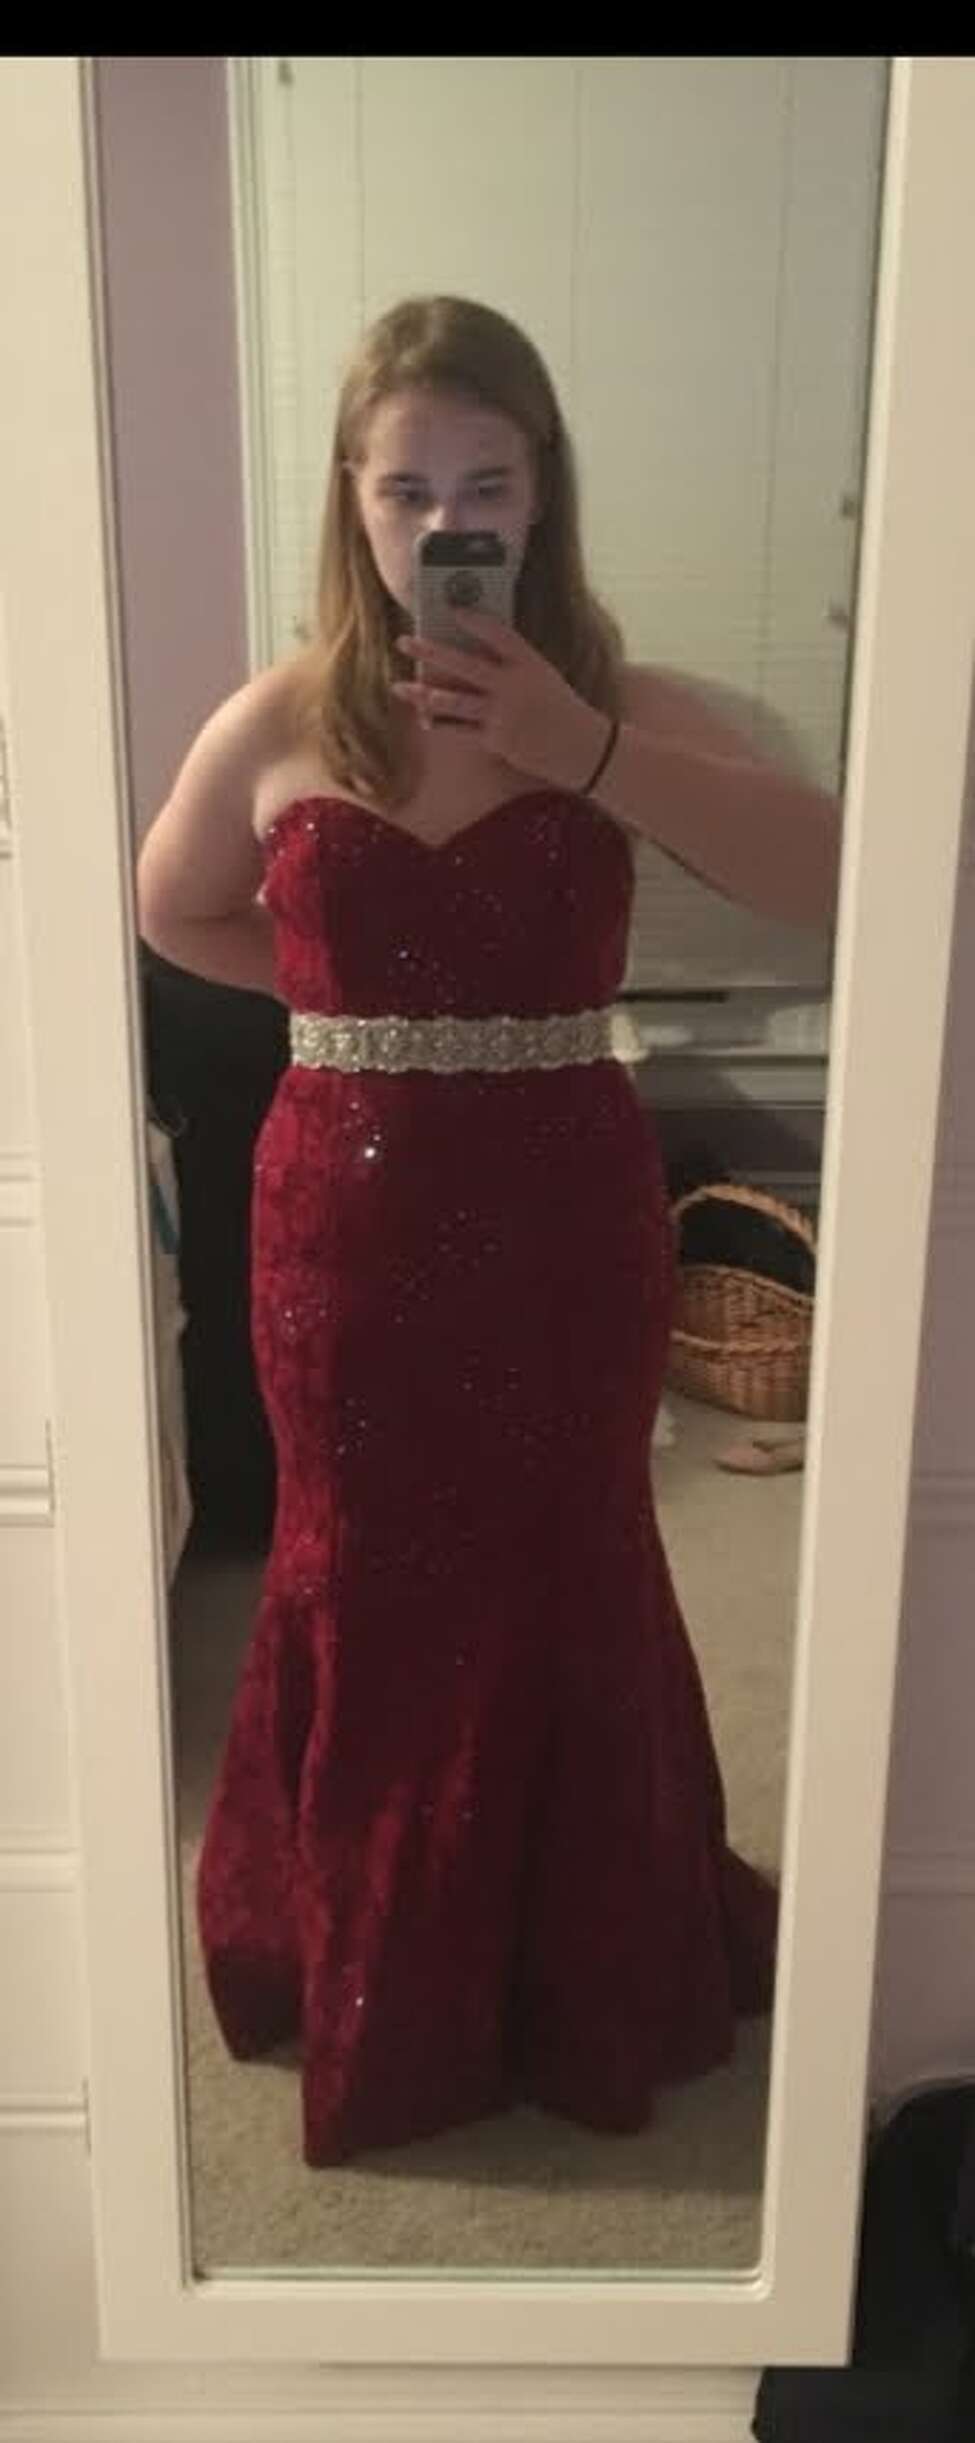 Prom dreams dashed, but the dresses remain